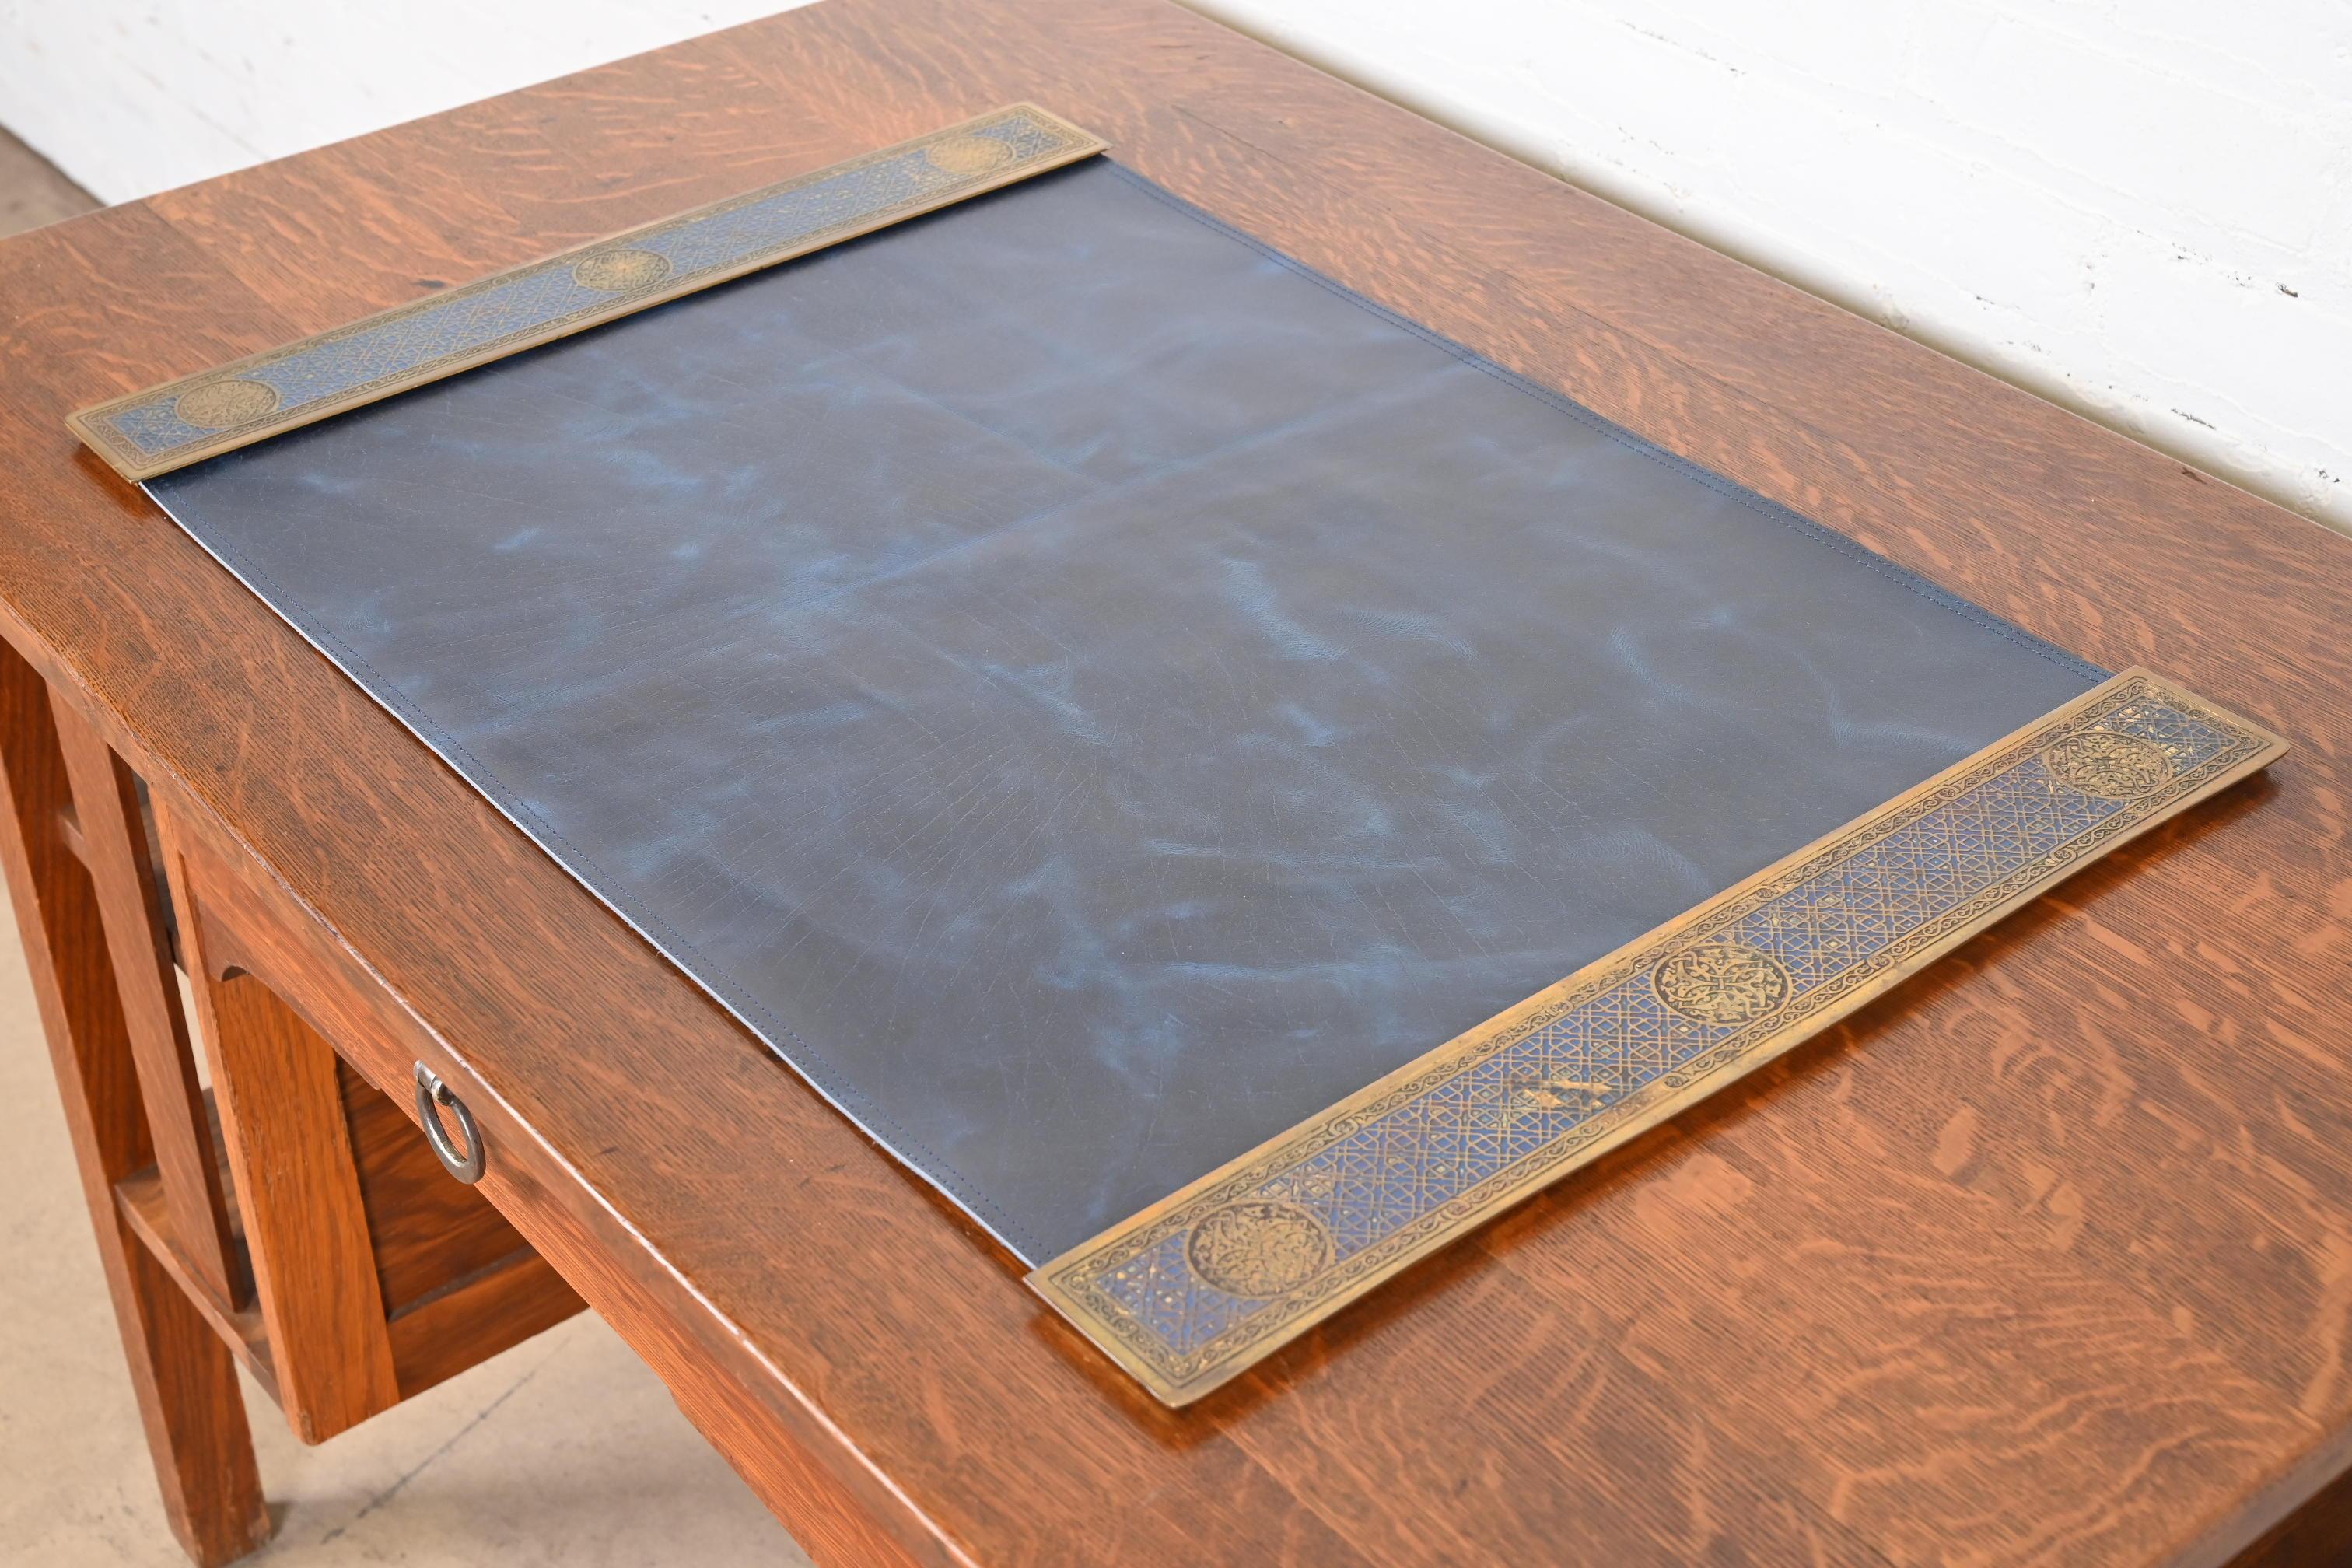 Tiffany Studios New York Bronze and Enamel Blotter Ends With Leather Desk Pad In Good Condition For Sale In South Bend, IN